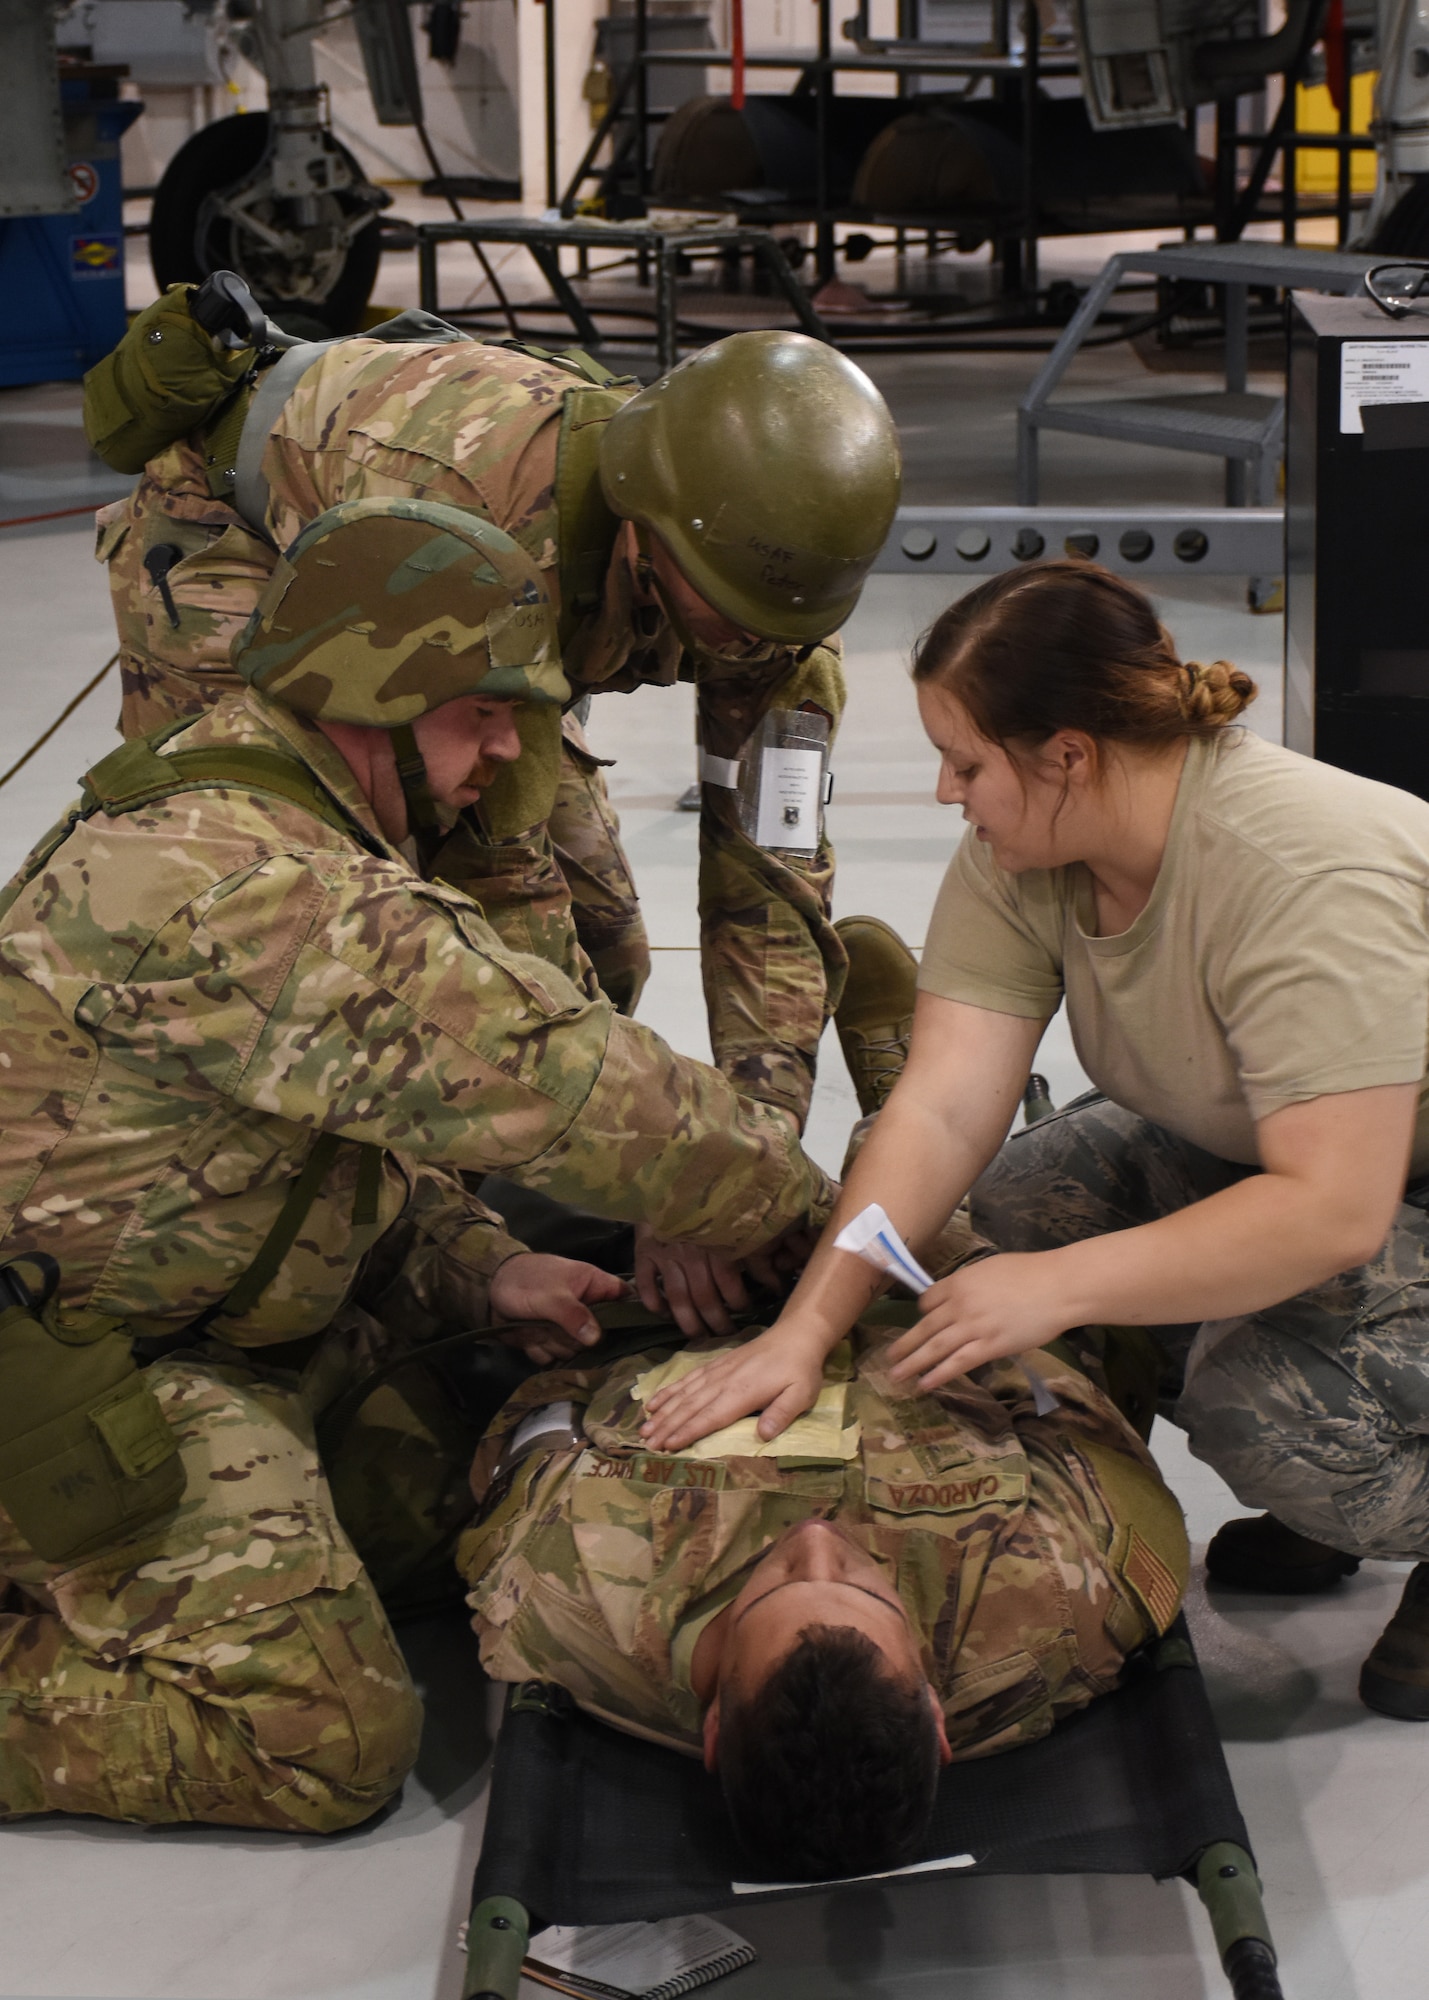 Airmen with the 442d Maintenance Squadron provide self-aid buddy care to a simulated-wounded wingman during a wing-level exercise, Ozark Thunder 20-01, at Whiteman Air Force Base, Mo., Nov. 3, 2019. The exercise is meant to test the wing’s ability to survive and operate and perform mission essential tasks during contingency operations.